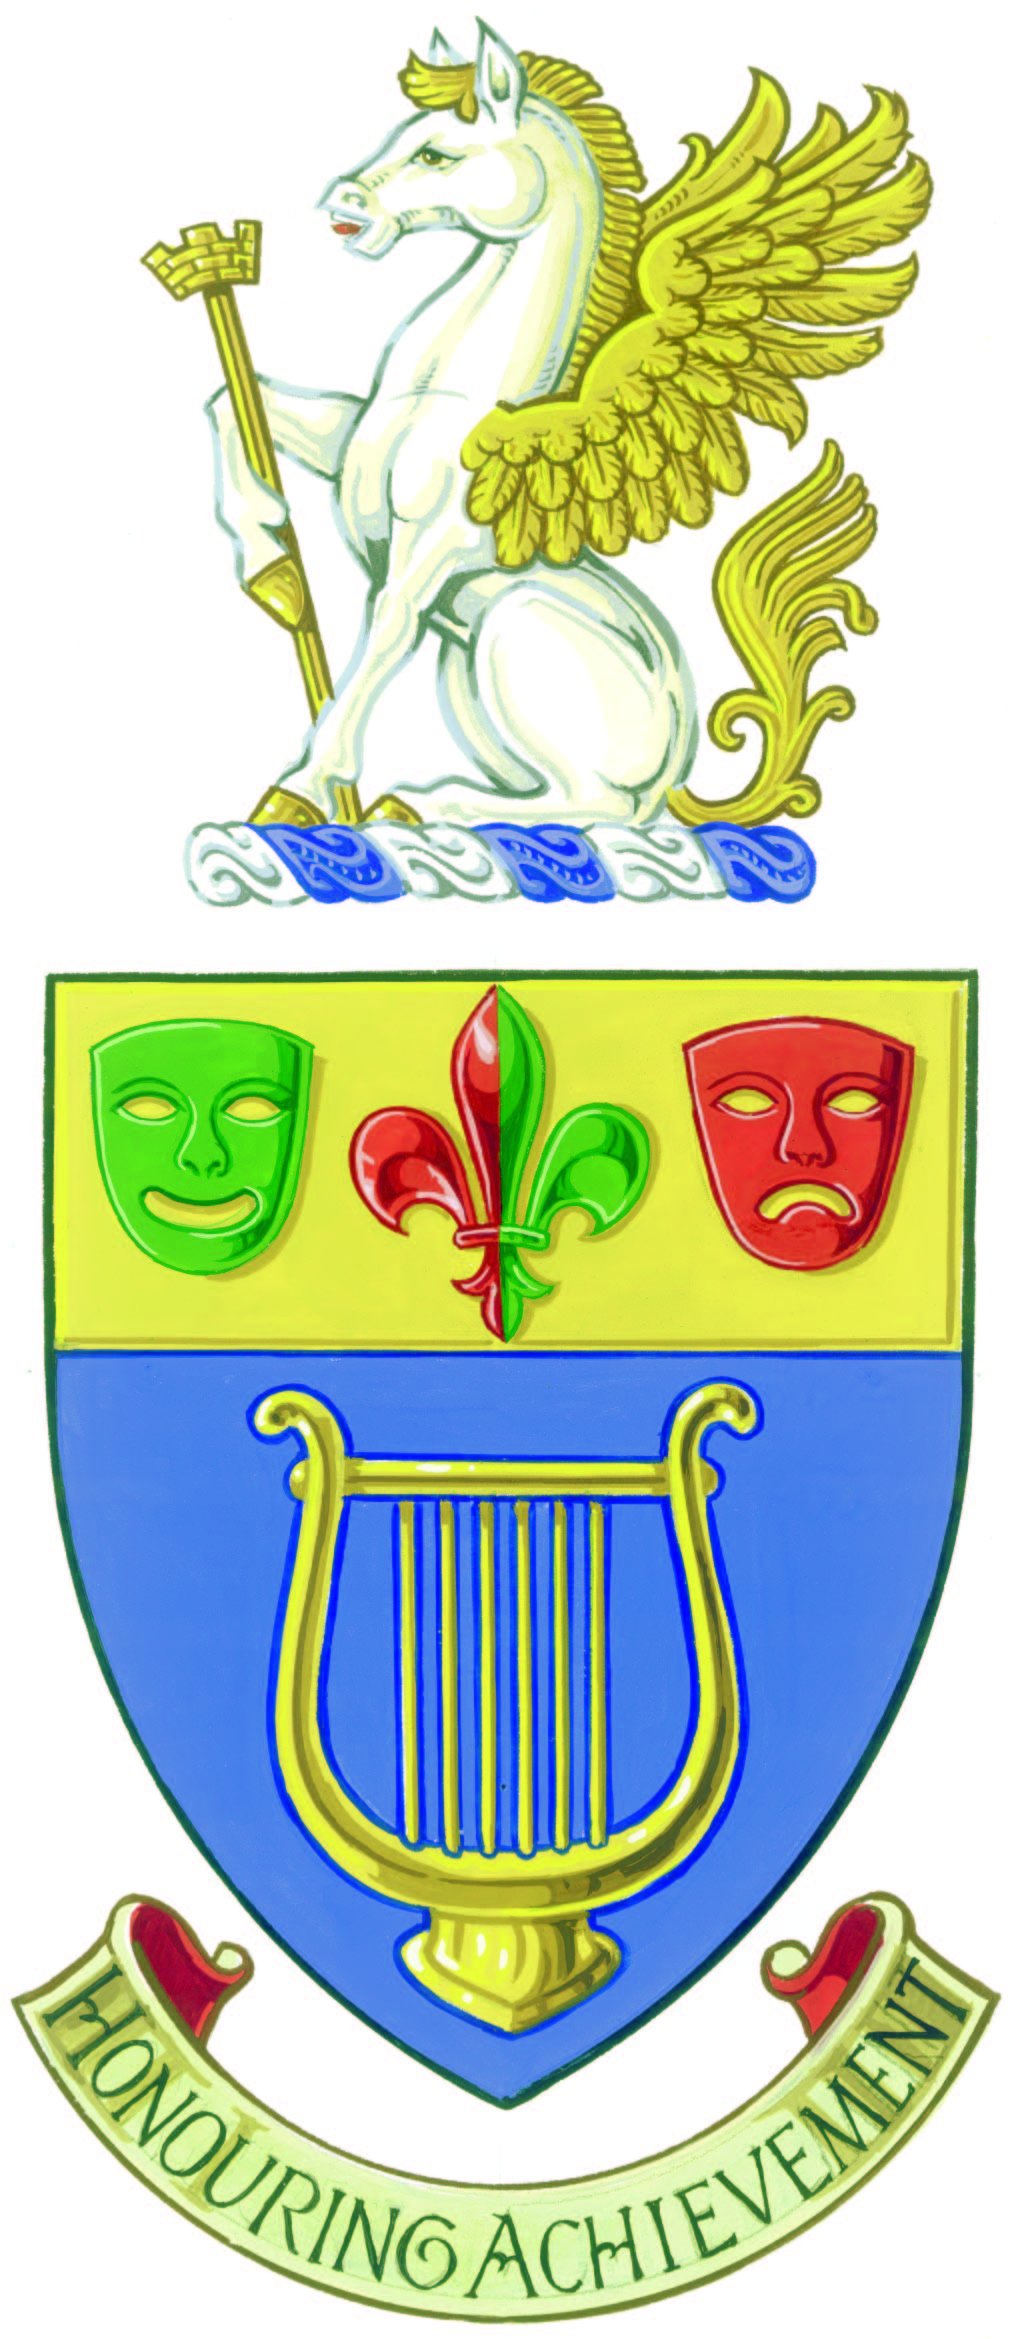 A coat of arms featuring a harp, winged horse and tragedy and comedy masks.